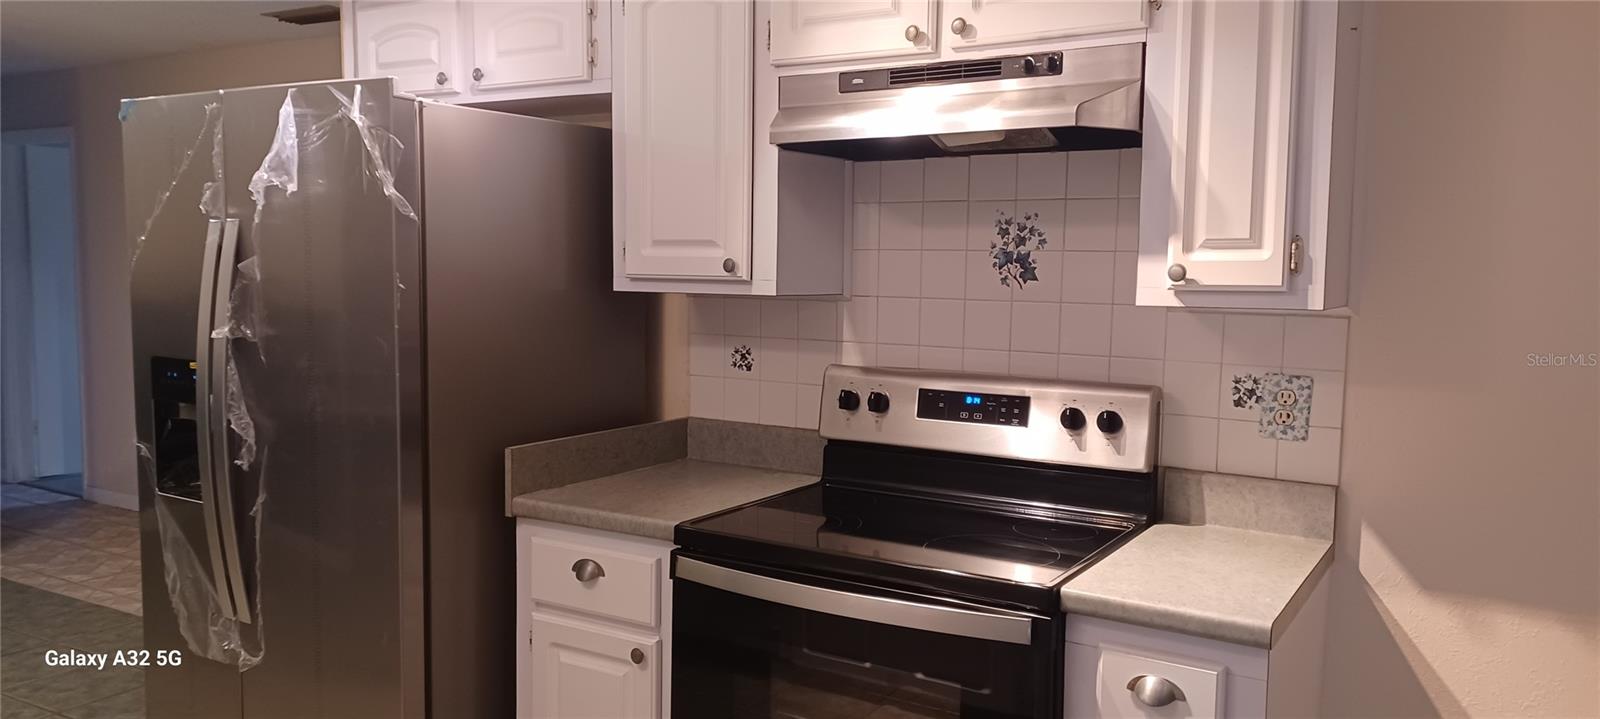 all updated stainless steel appliances